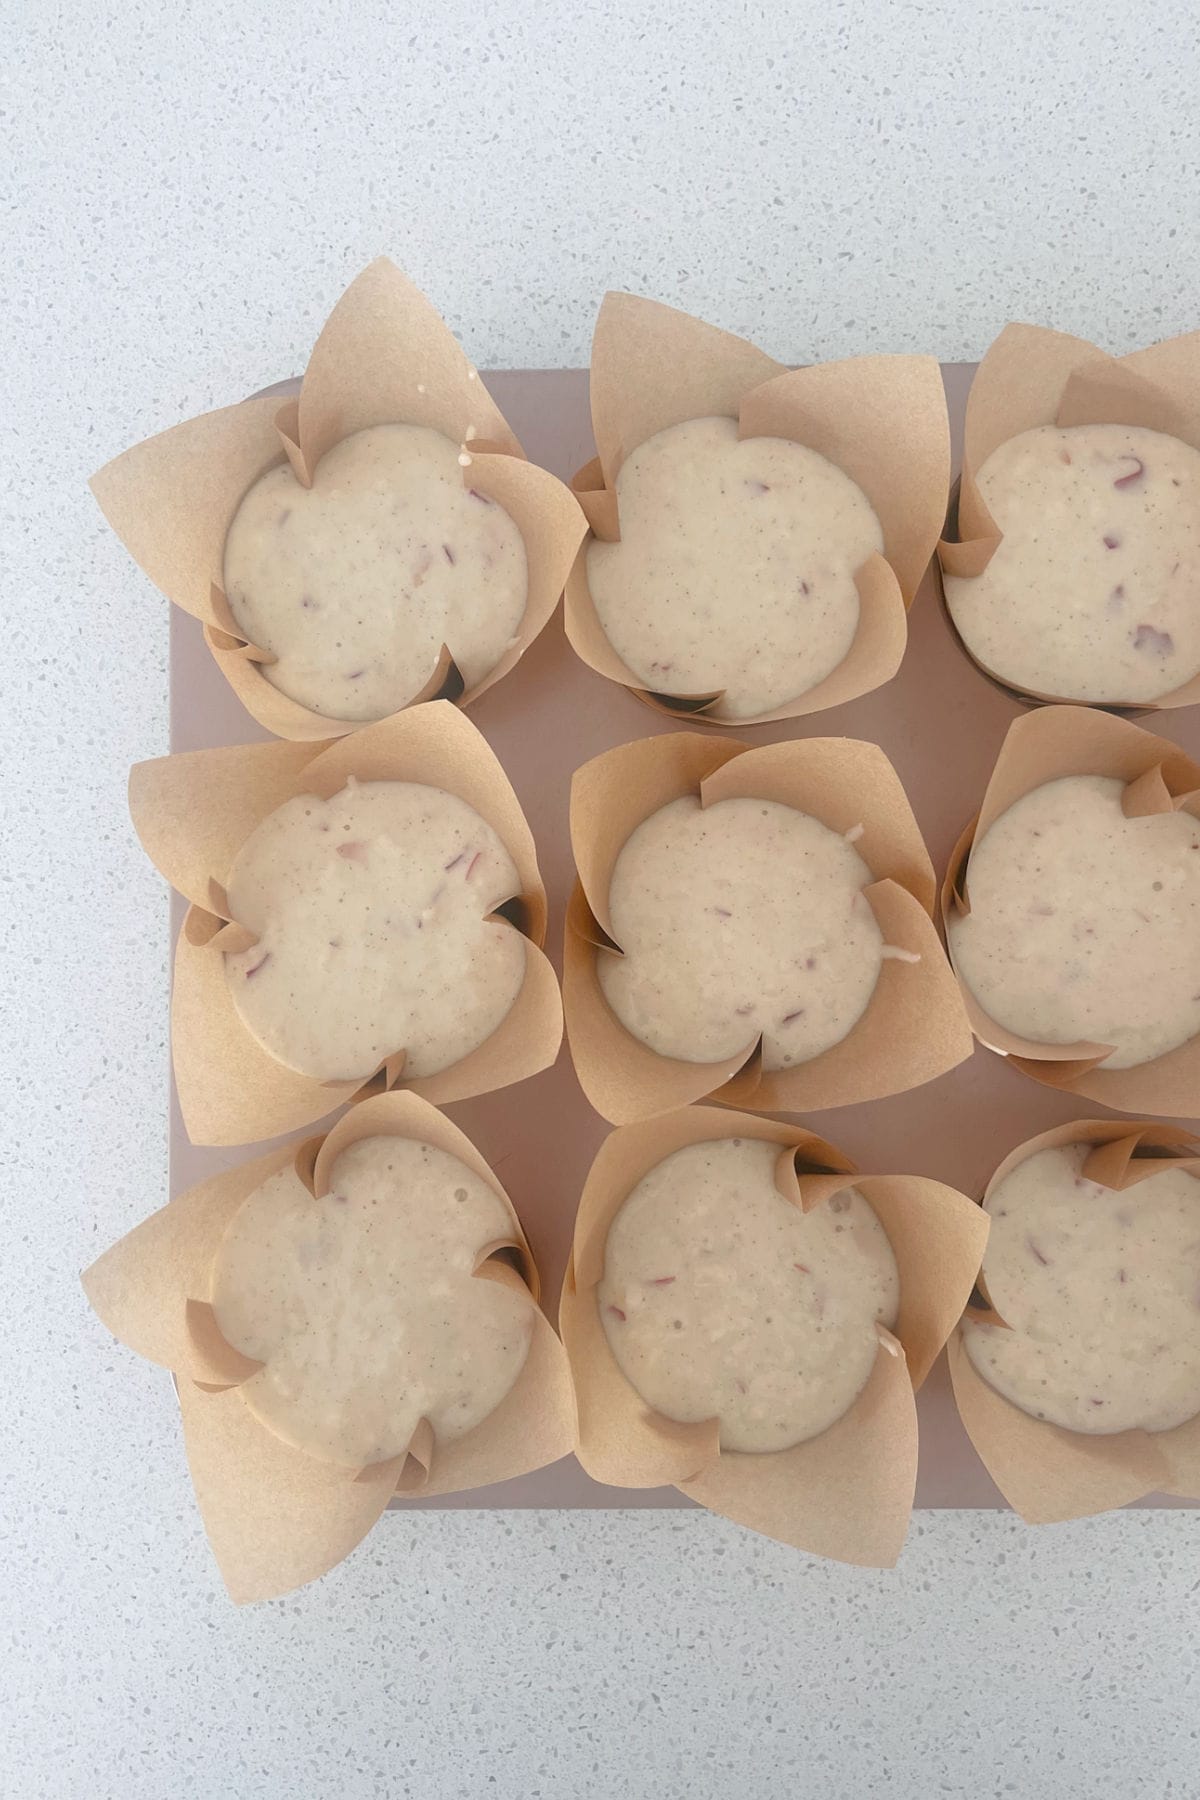 Apple Muffins in paper cases before going into the oven.